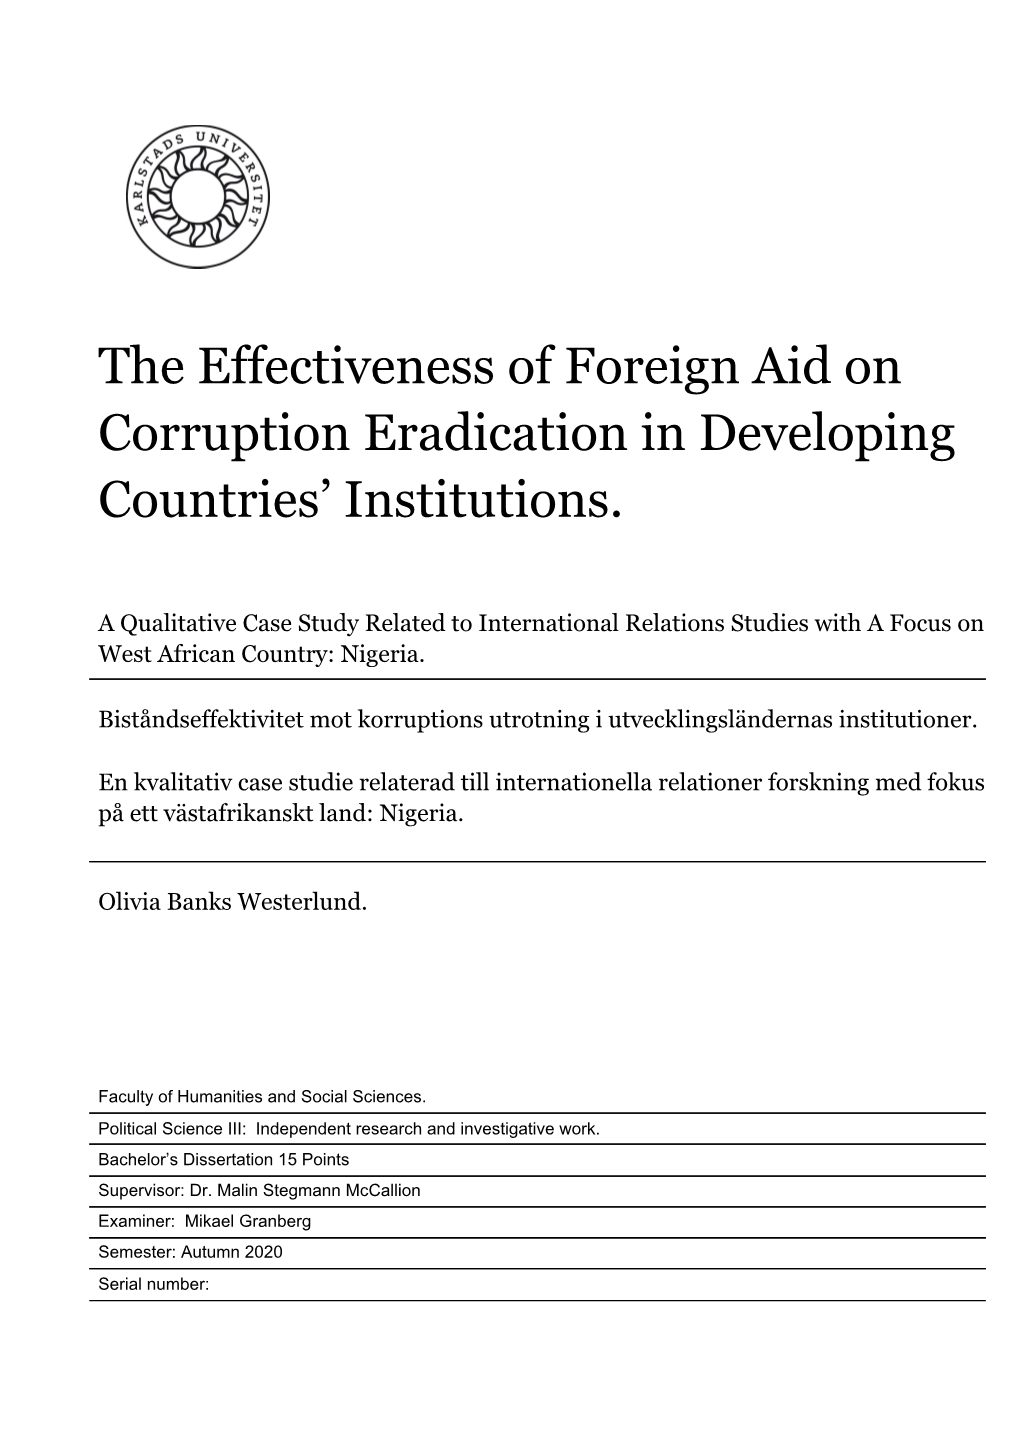 The Effectiveness of Foreign Aid on Corruption Eradication in Developing Countries’ Institutions